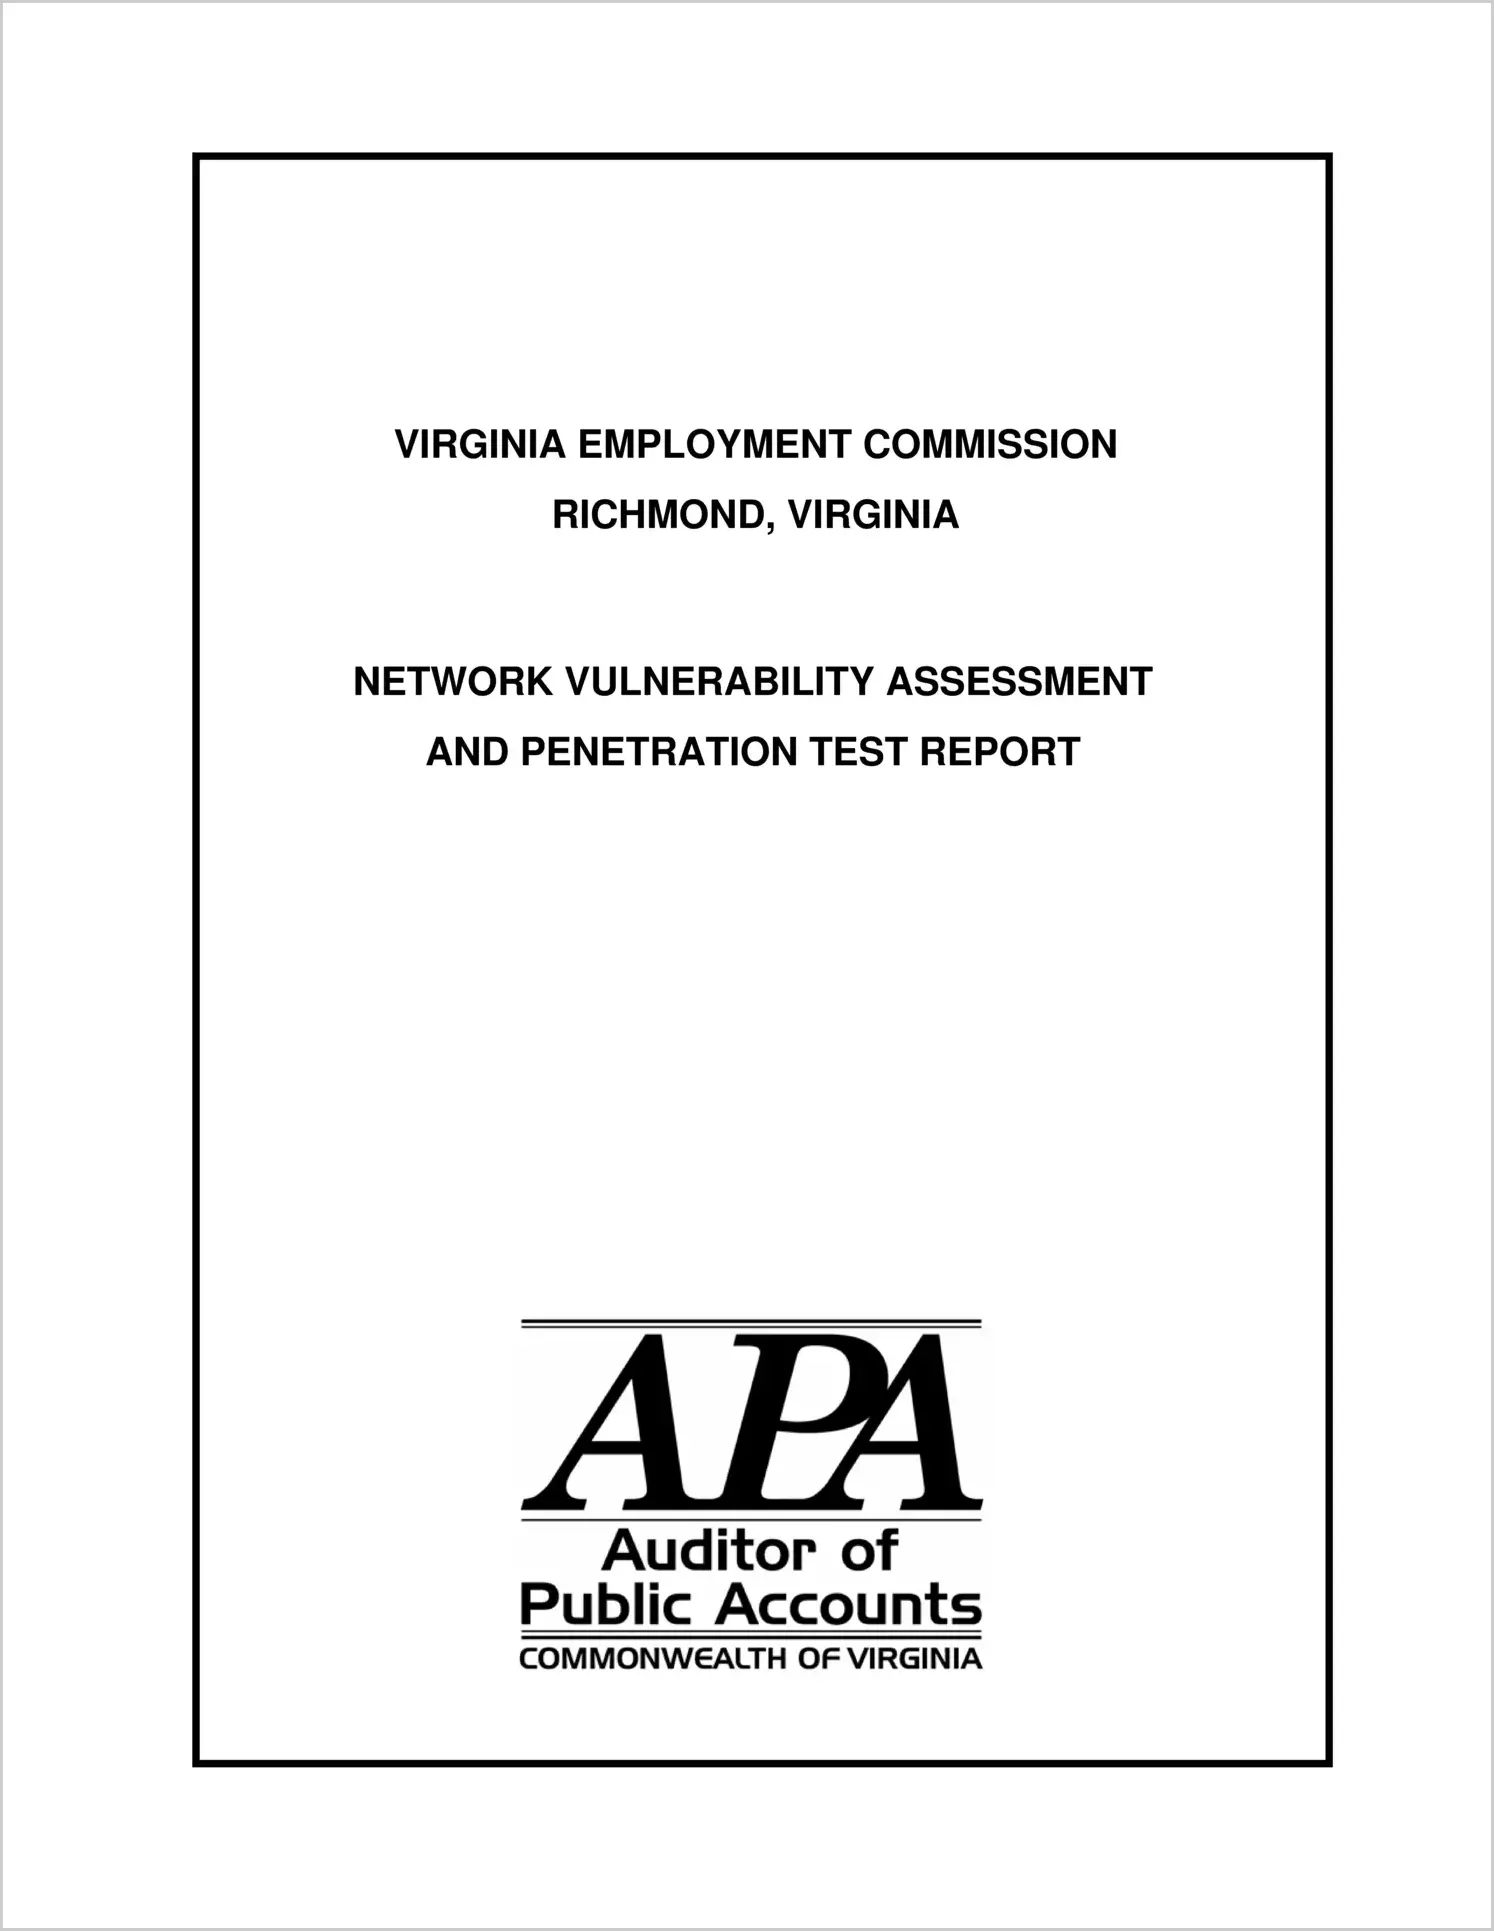 Special ReportVirginia Employment Commission Network Vulnerability Assessment and Penetration Test Report(Report Date: 2004)